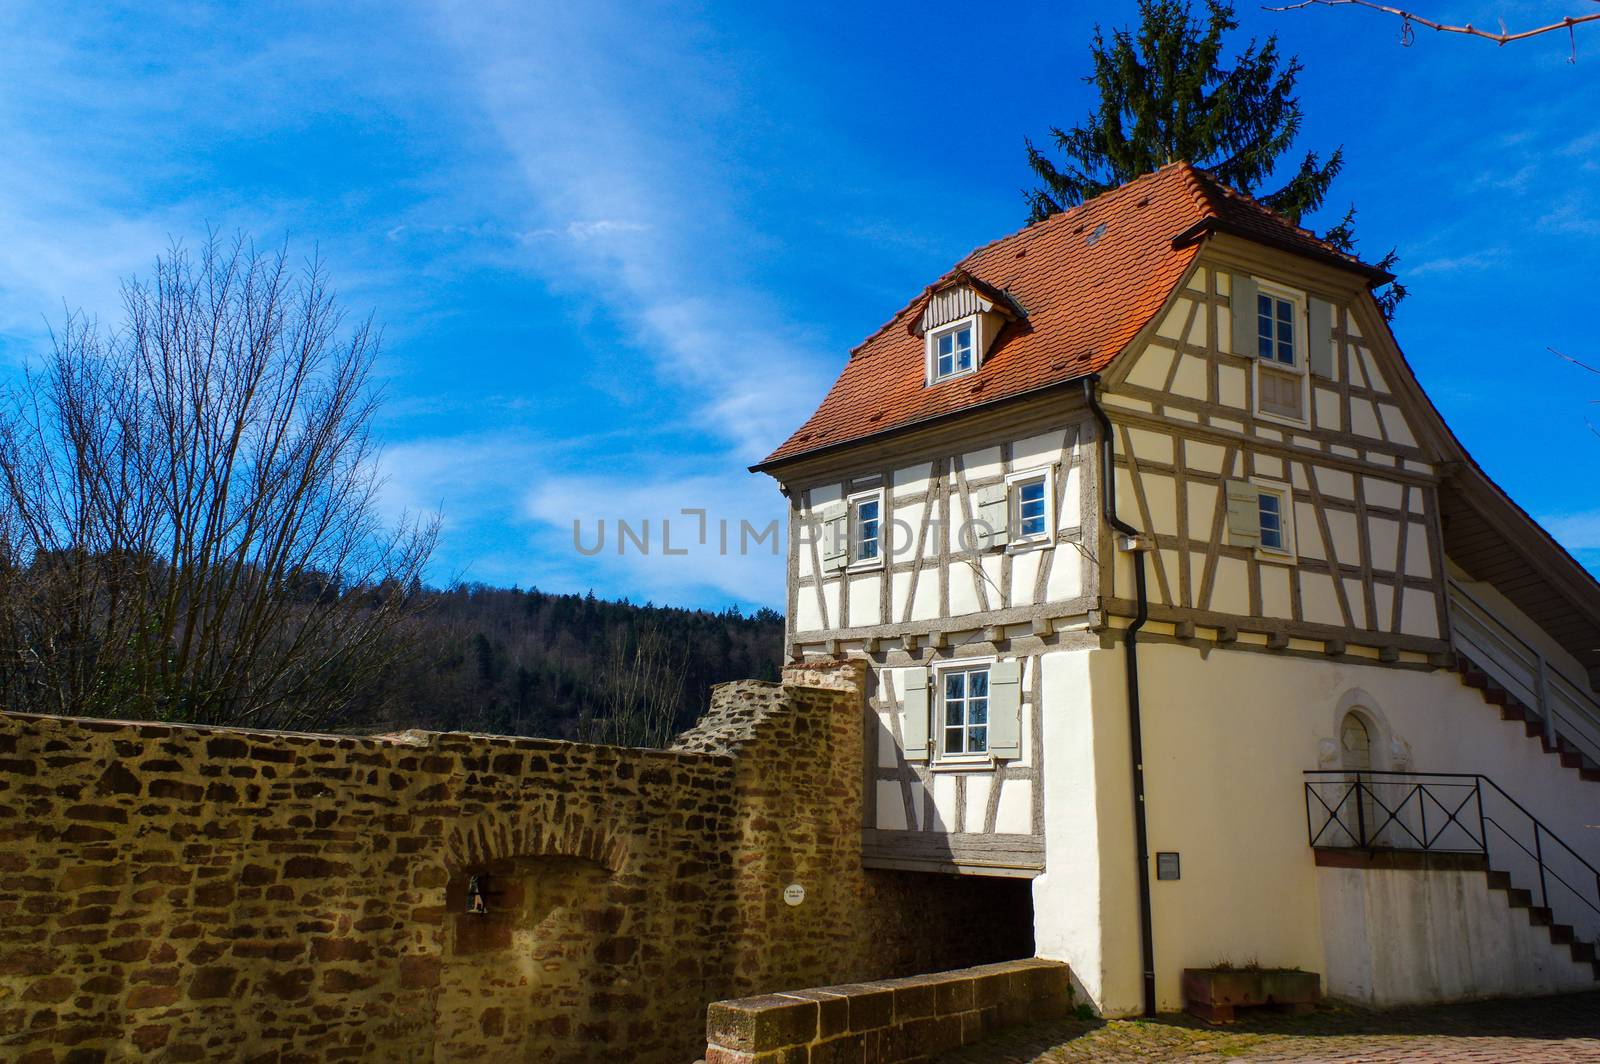 Residential tudor style house with blue sky in background by evolutionnow